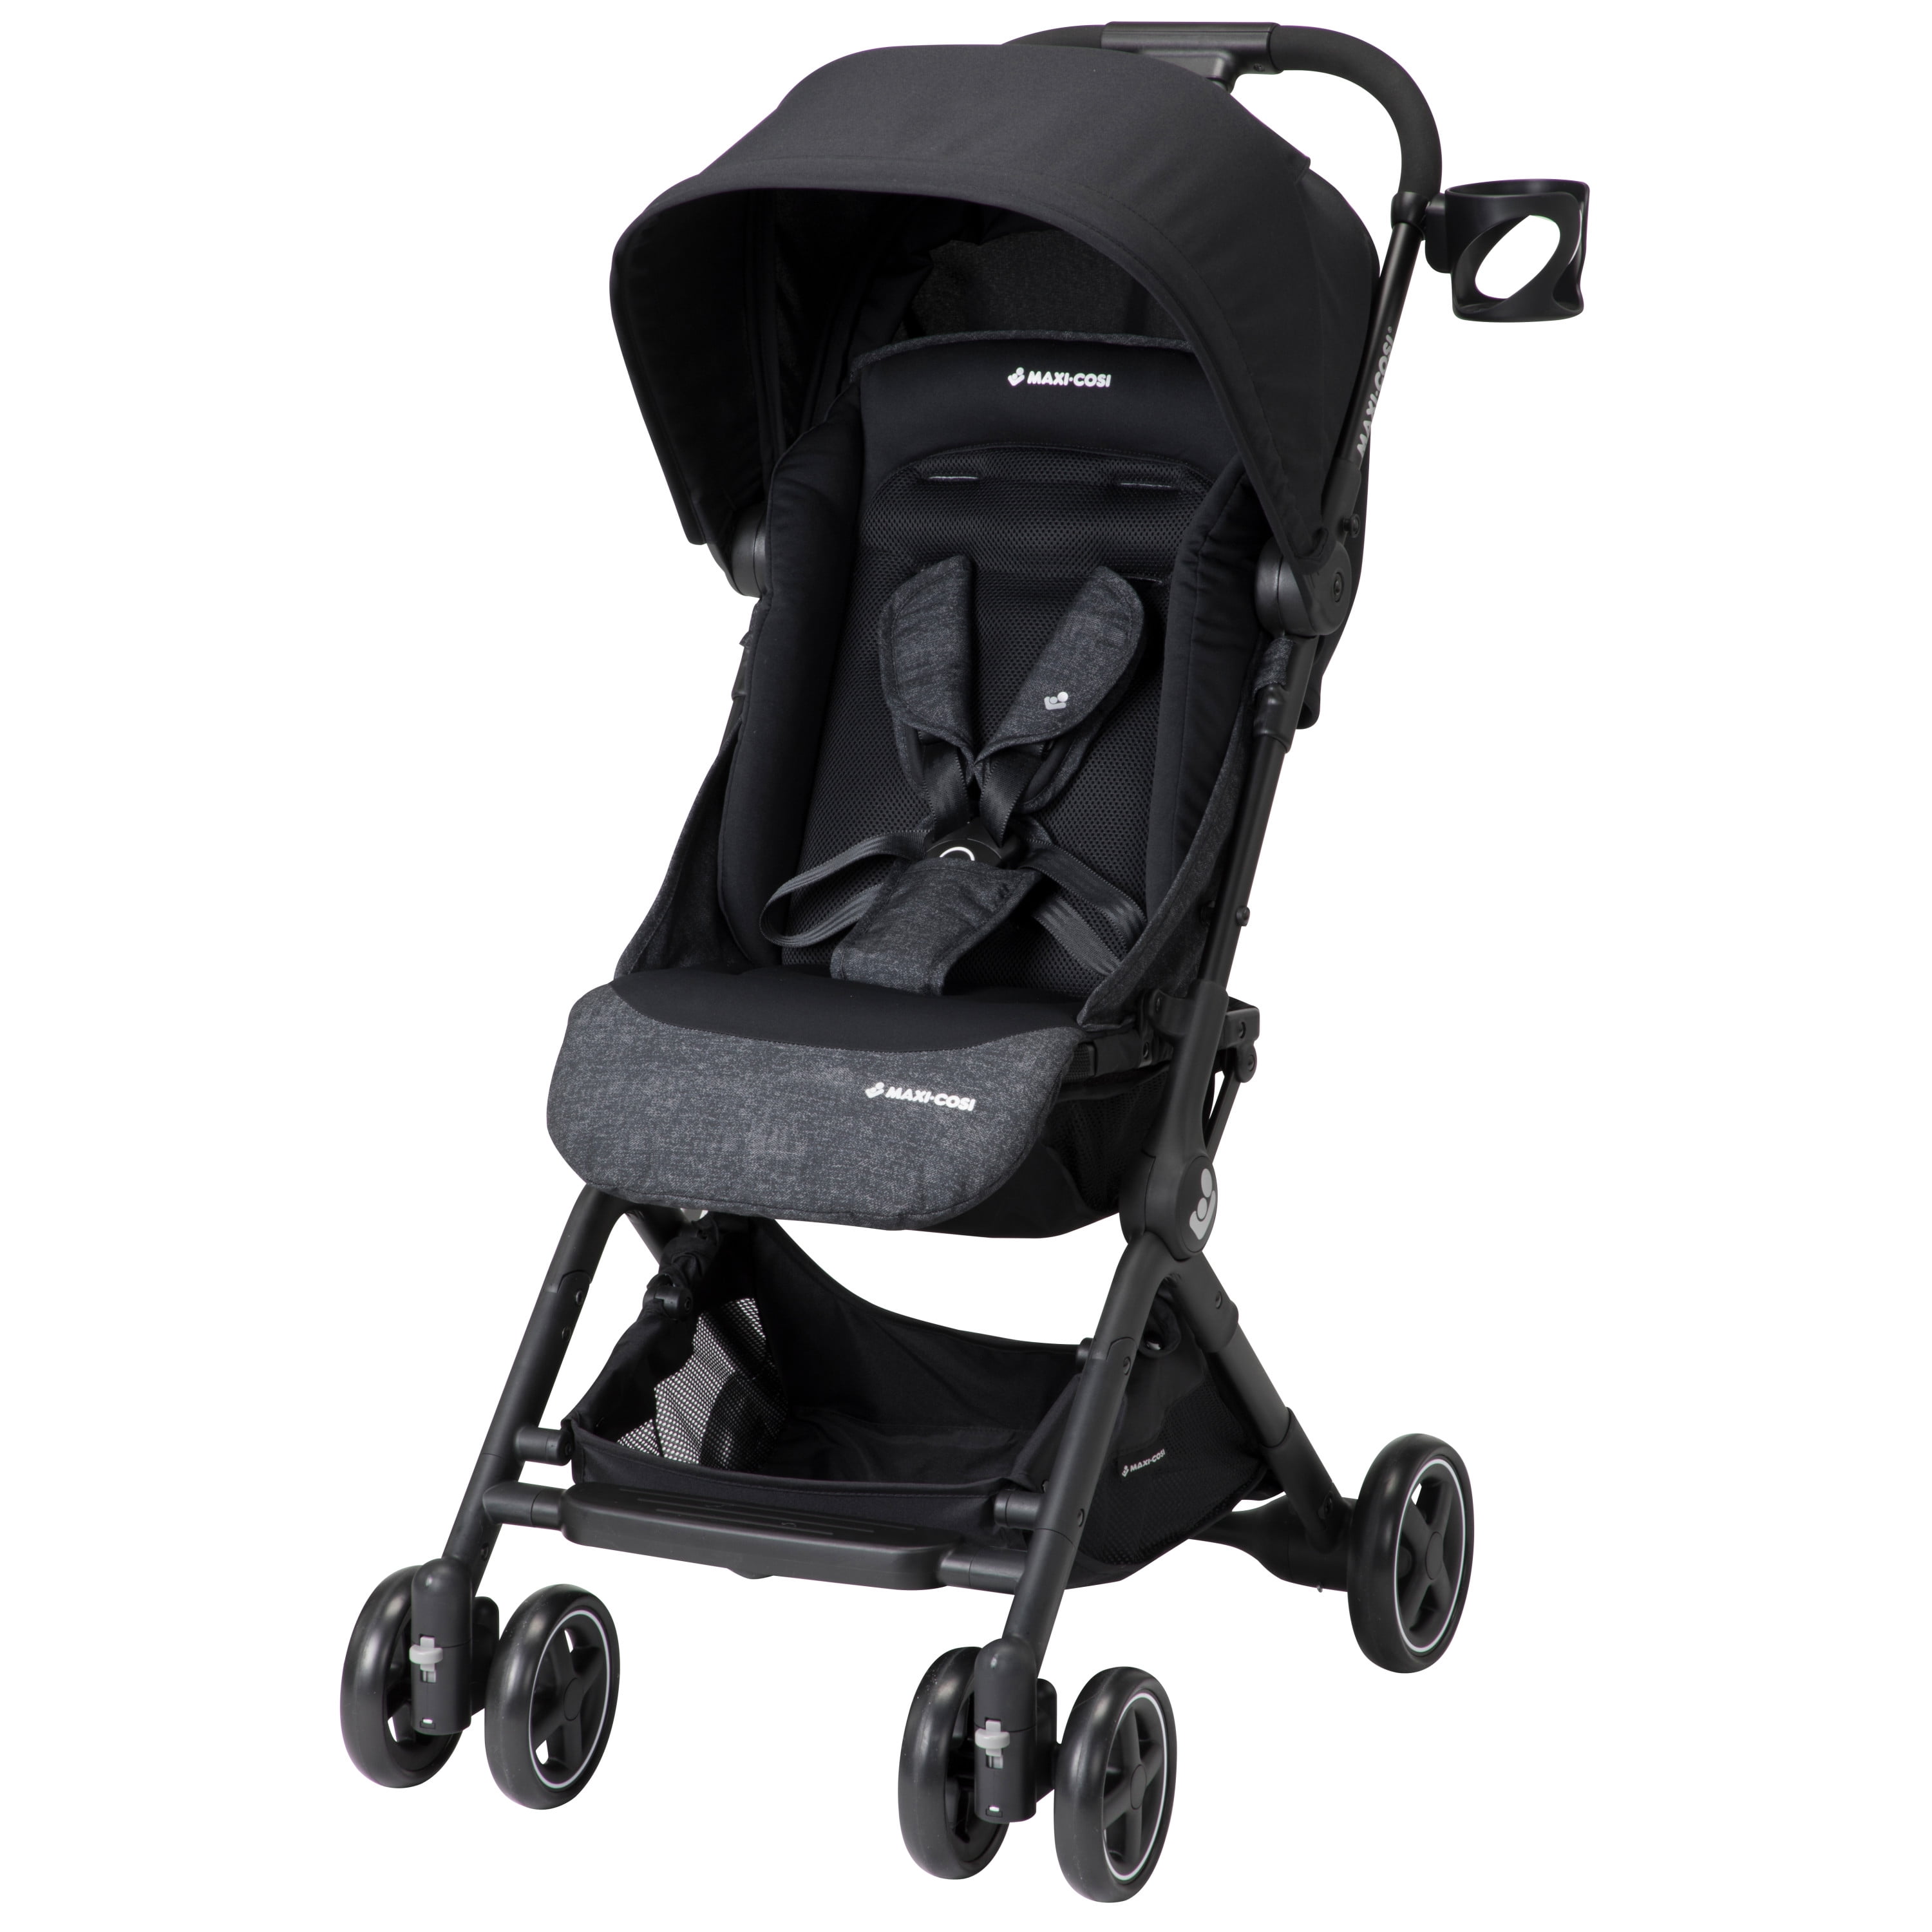 contours bitsy compact fold lightweight travel stroller